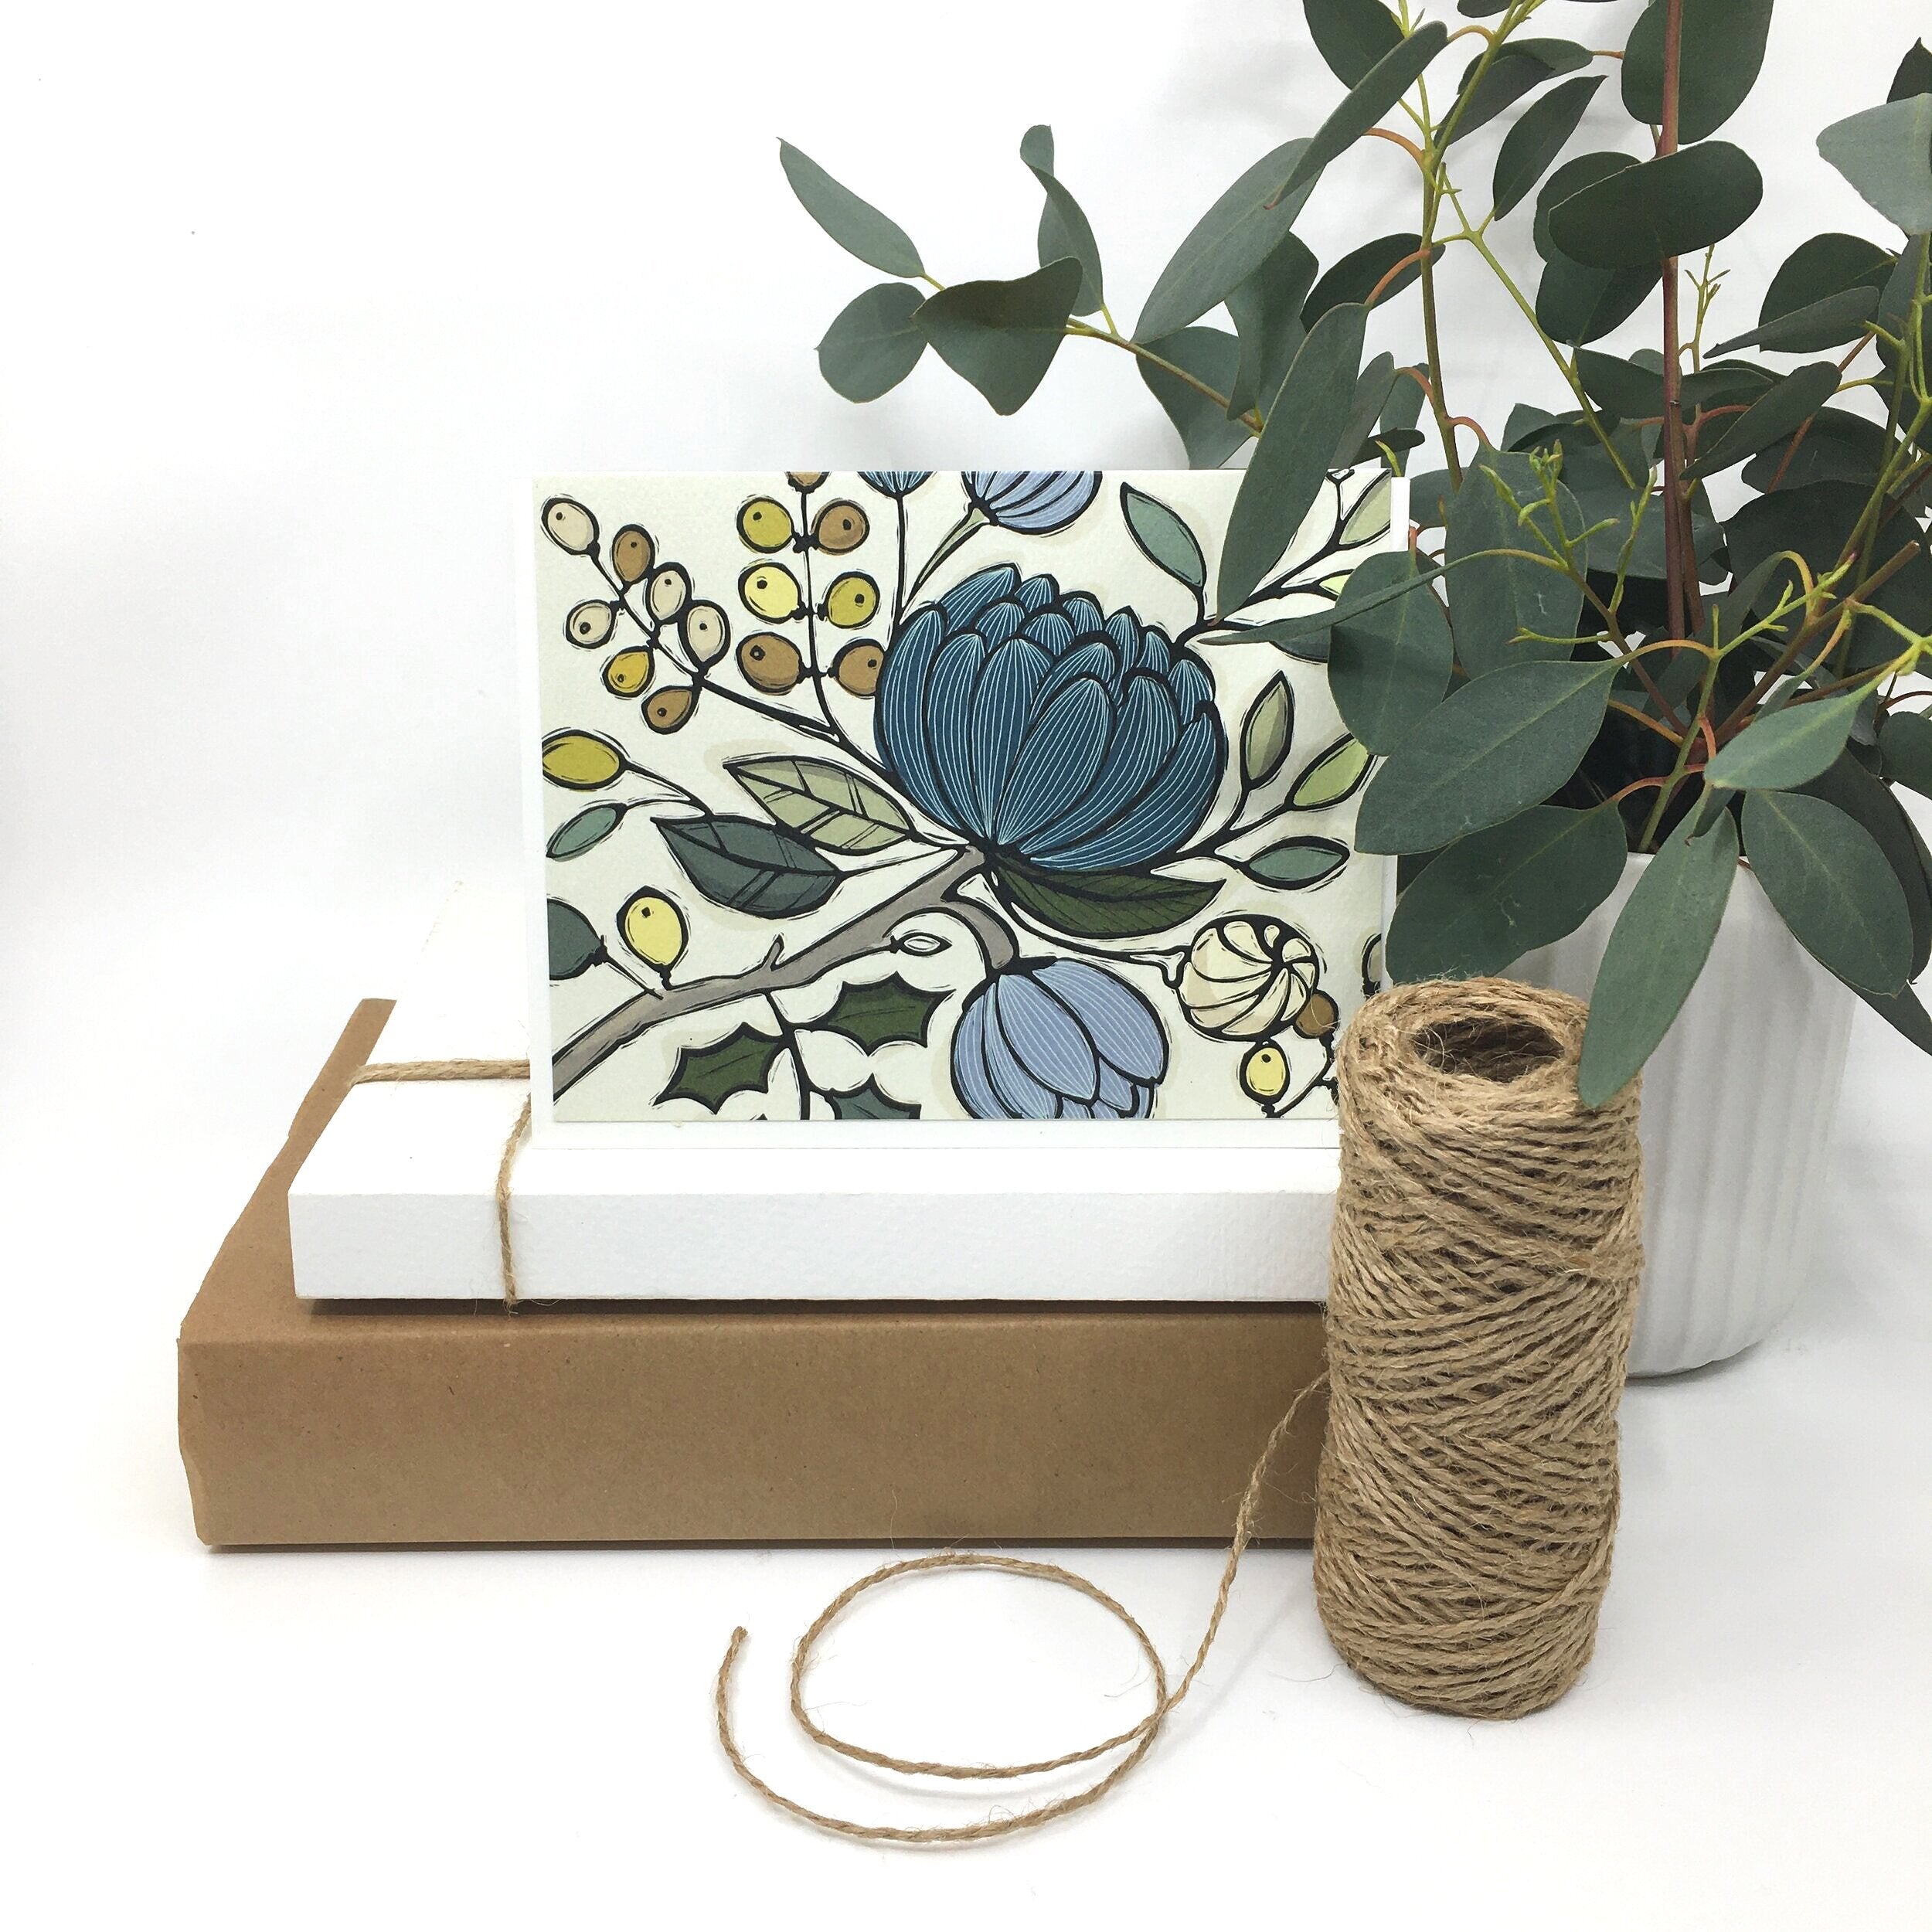 the Mediterranean floral card card sits on two paper boxes besides a roll of twine and a potted plant